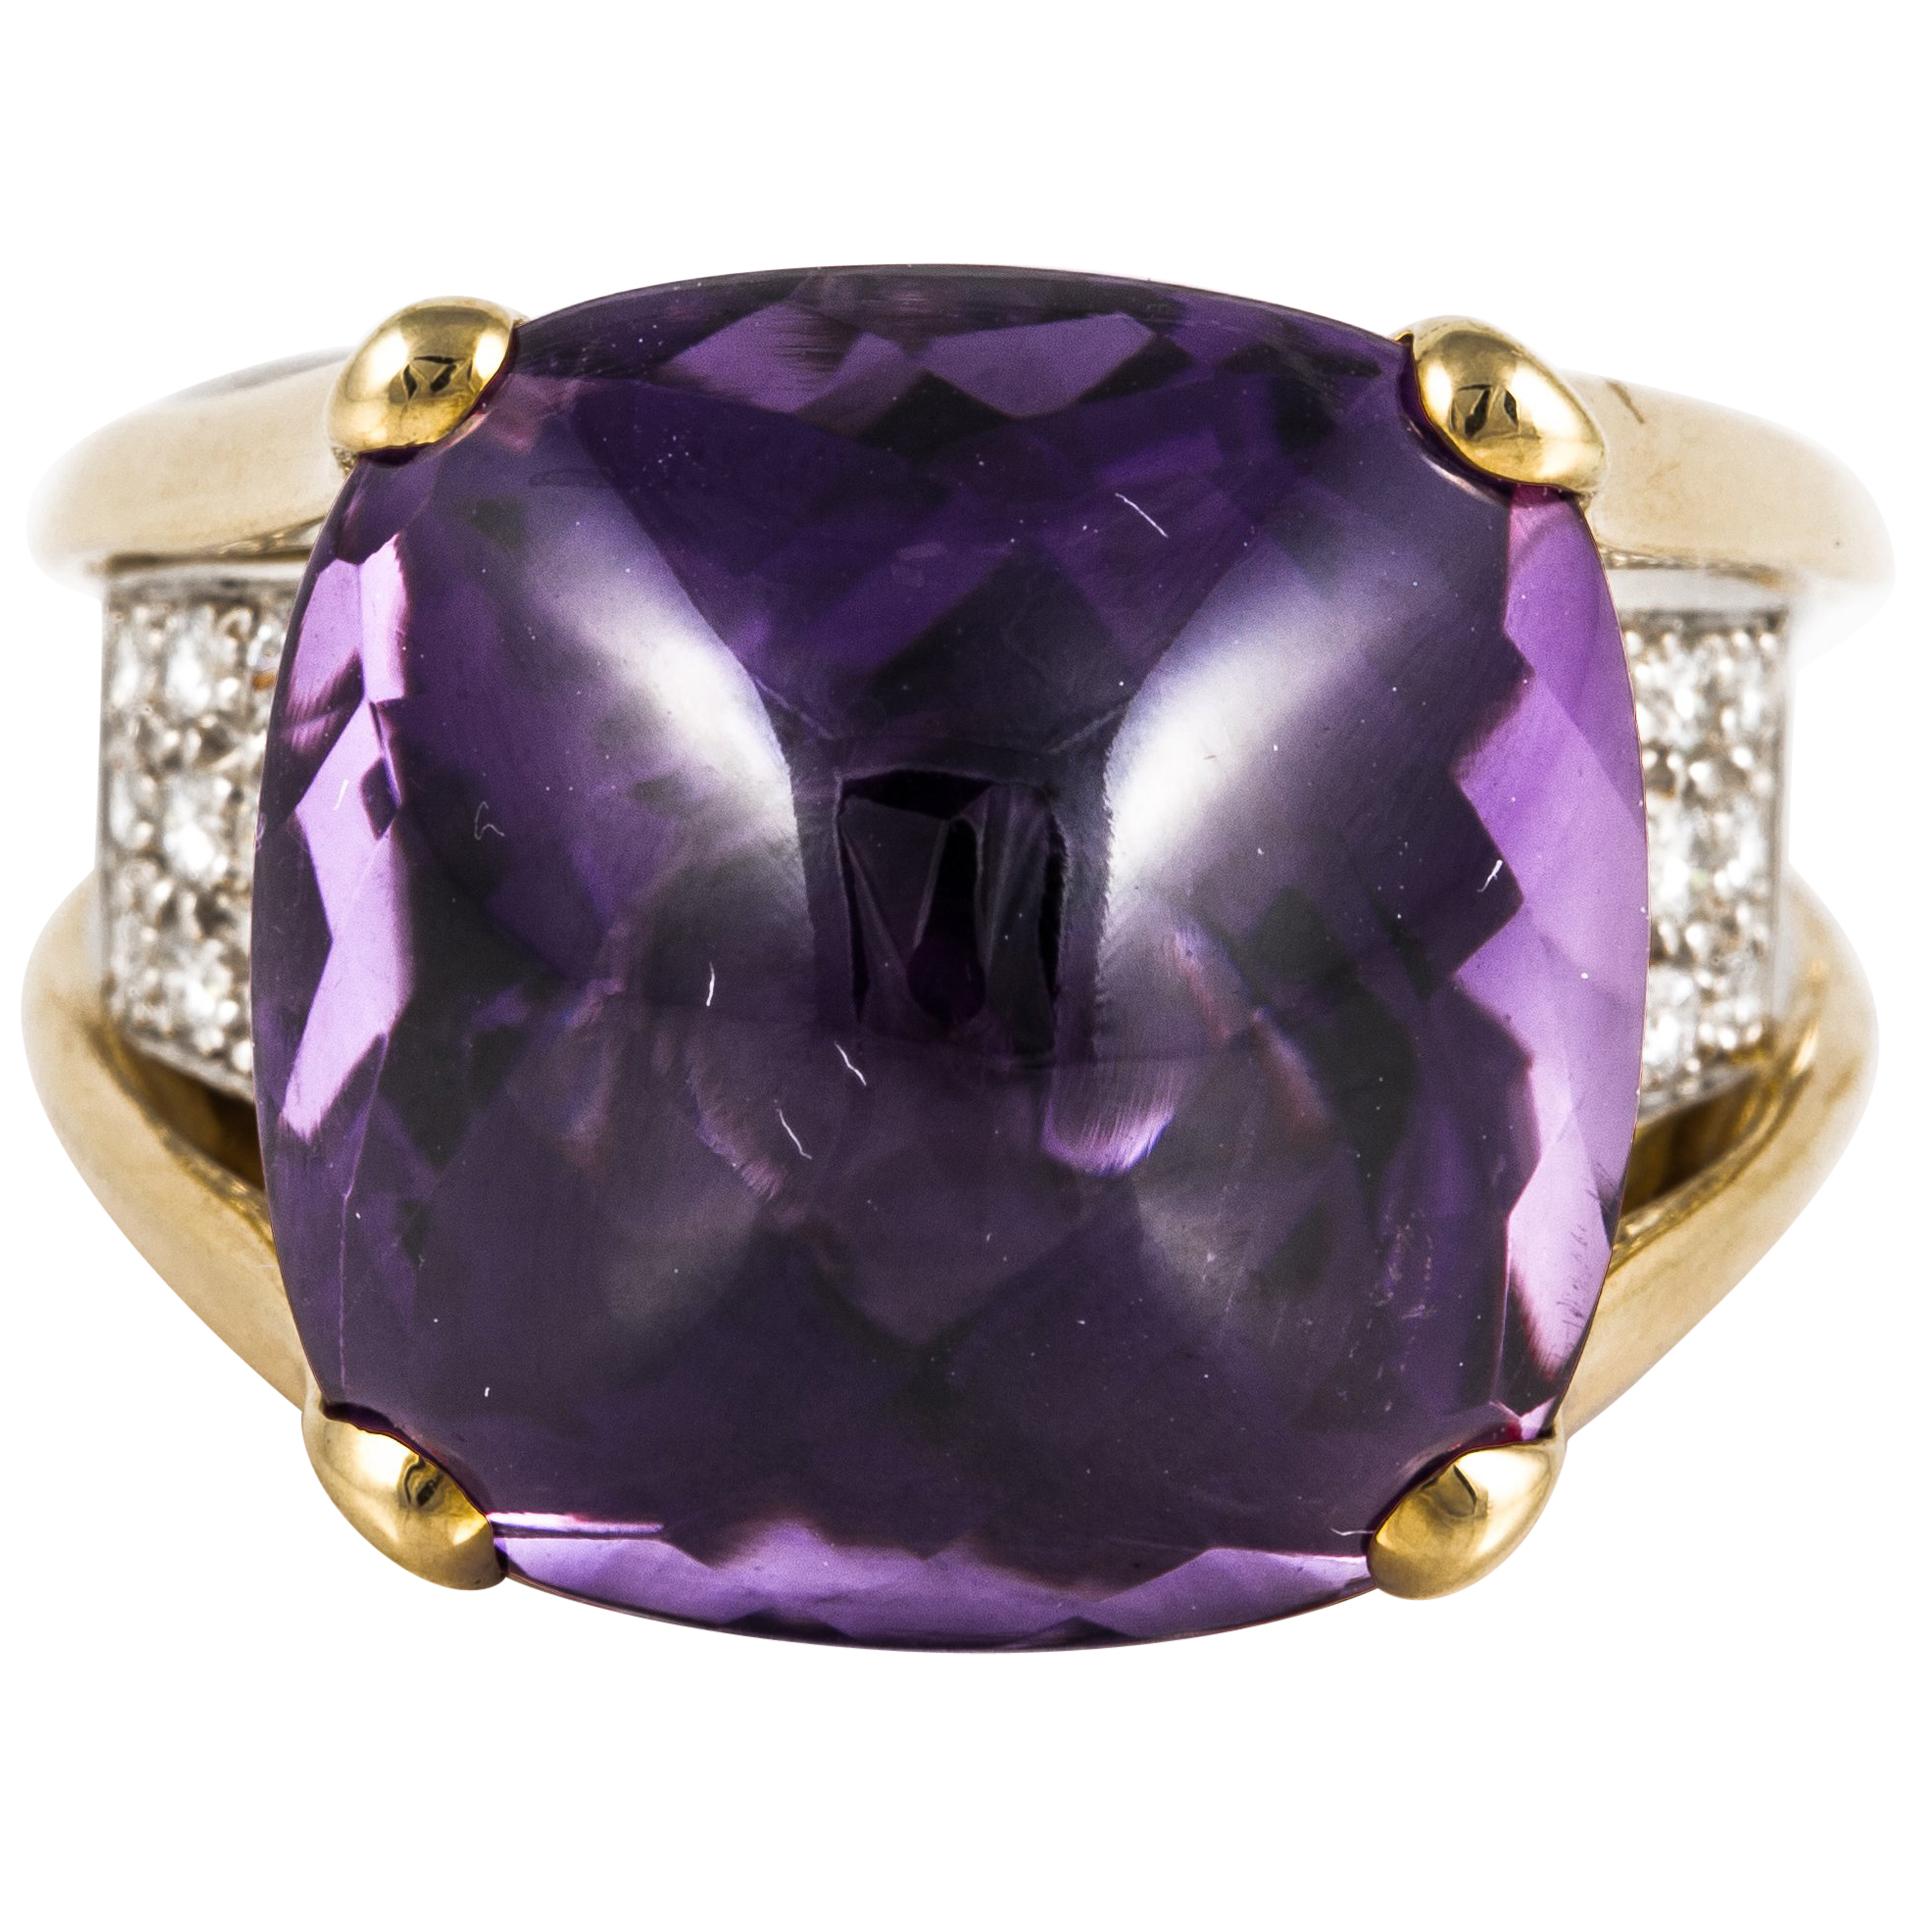 Cabochon Amethyst 18K Gold Ring with Diamonds 